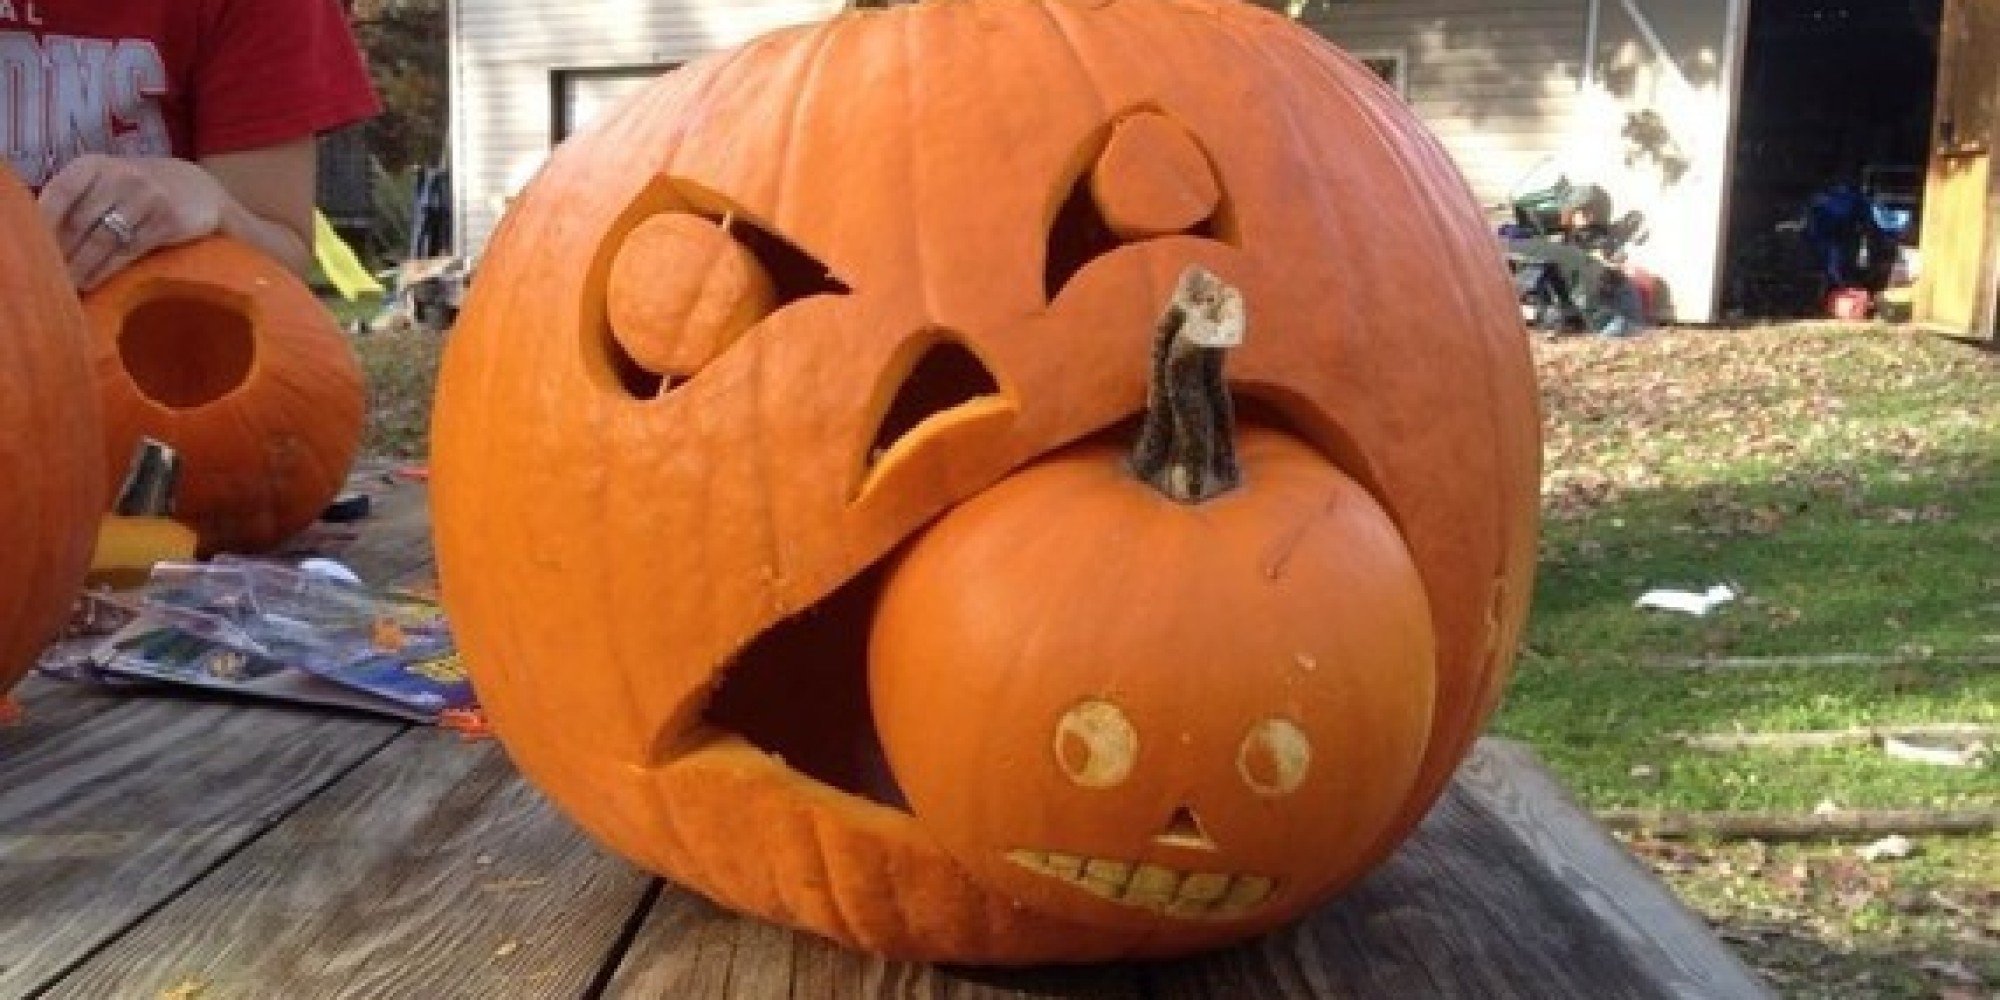 10 Best Jack O Lantern Ideas To Carve 34 epic jack o lantern ideas to try out this halloween huffpost 5 2022